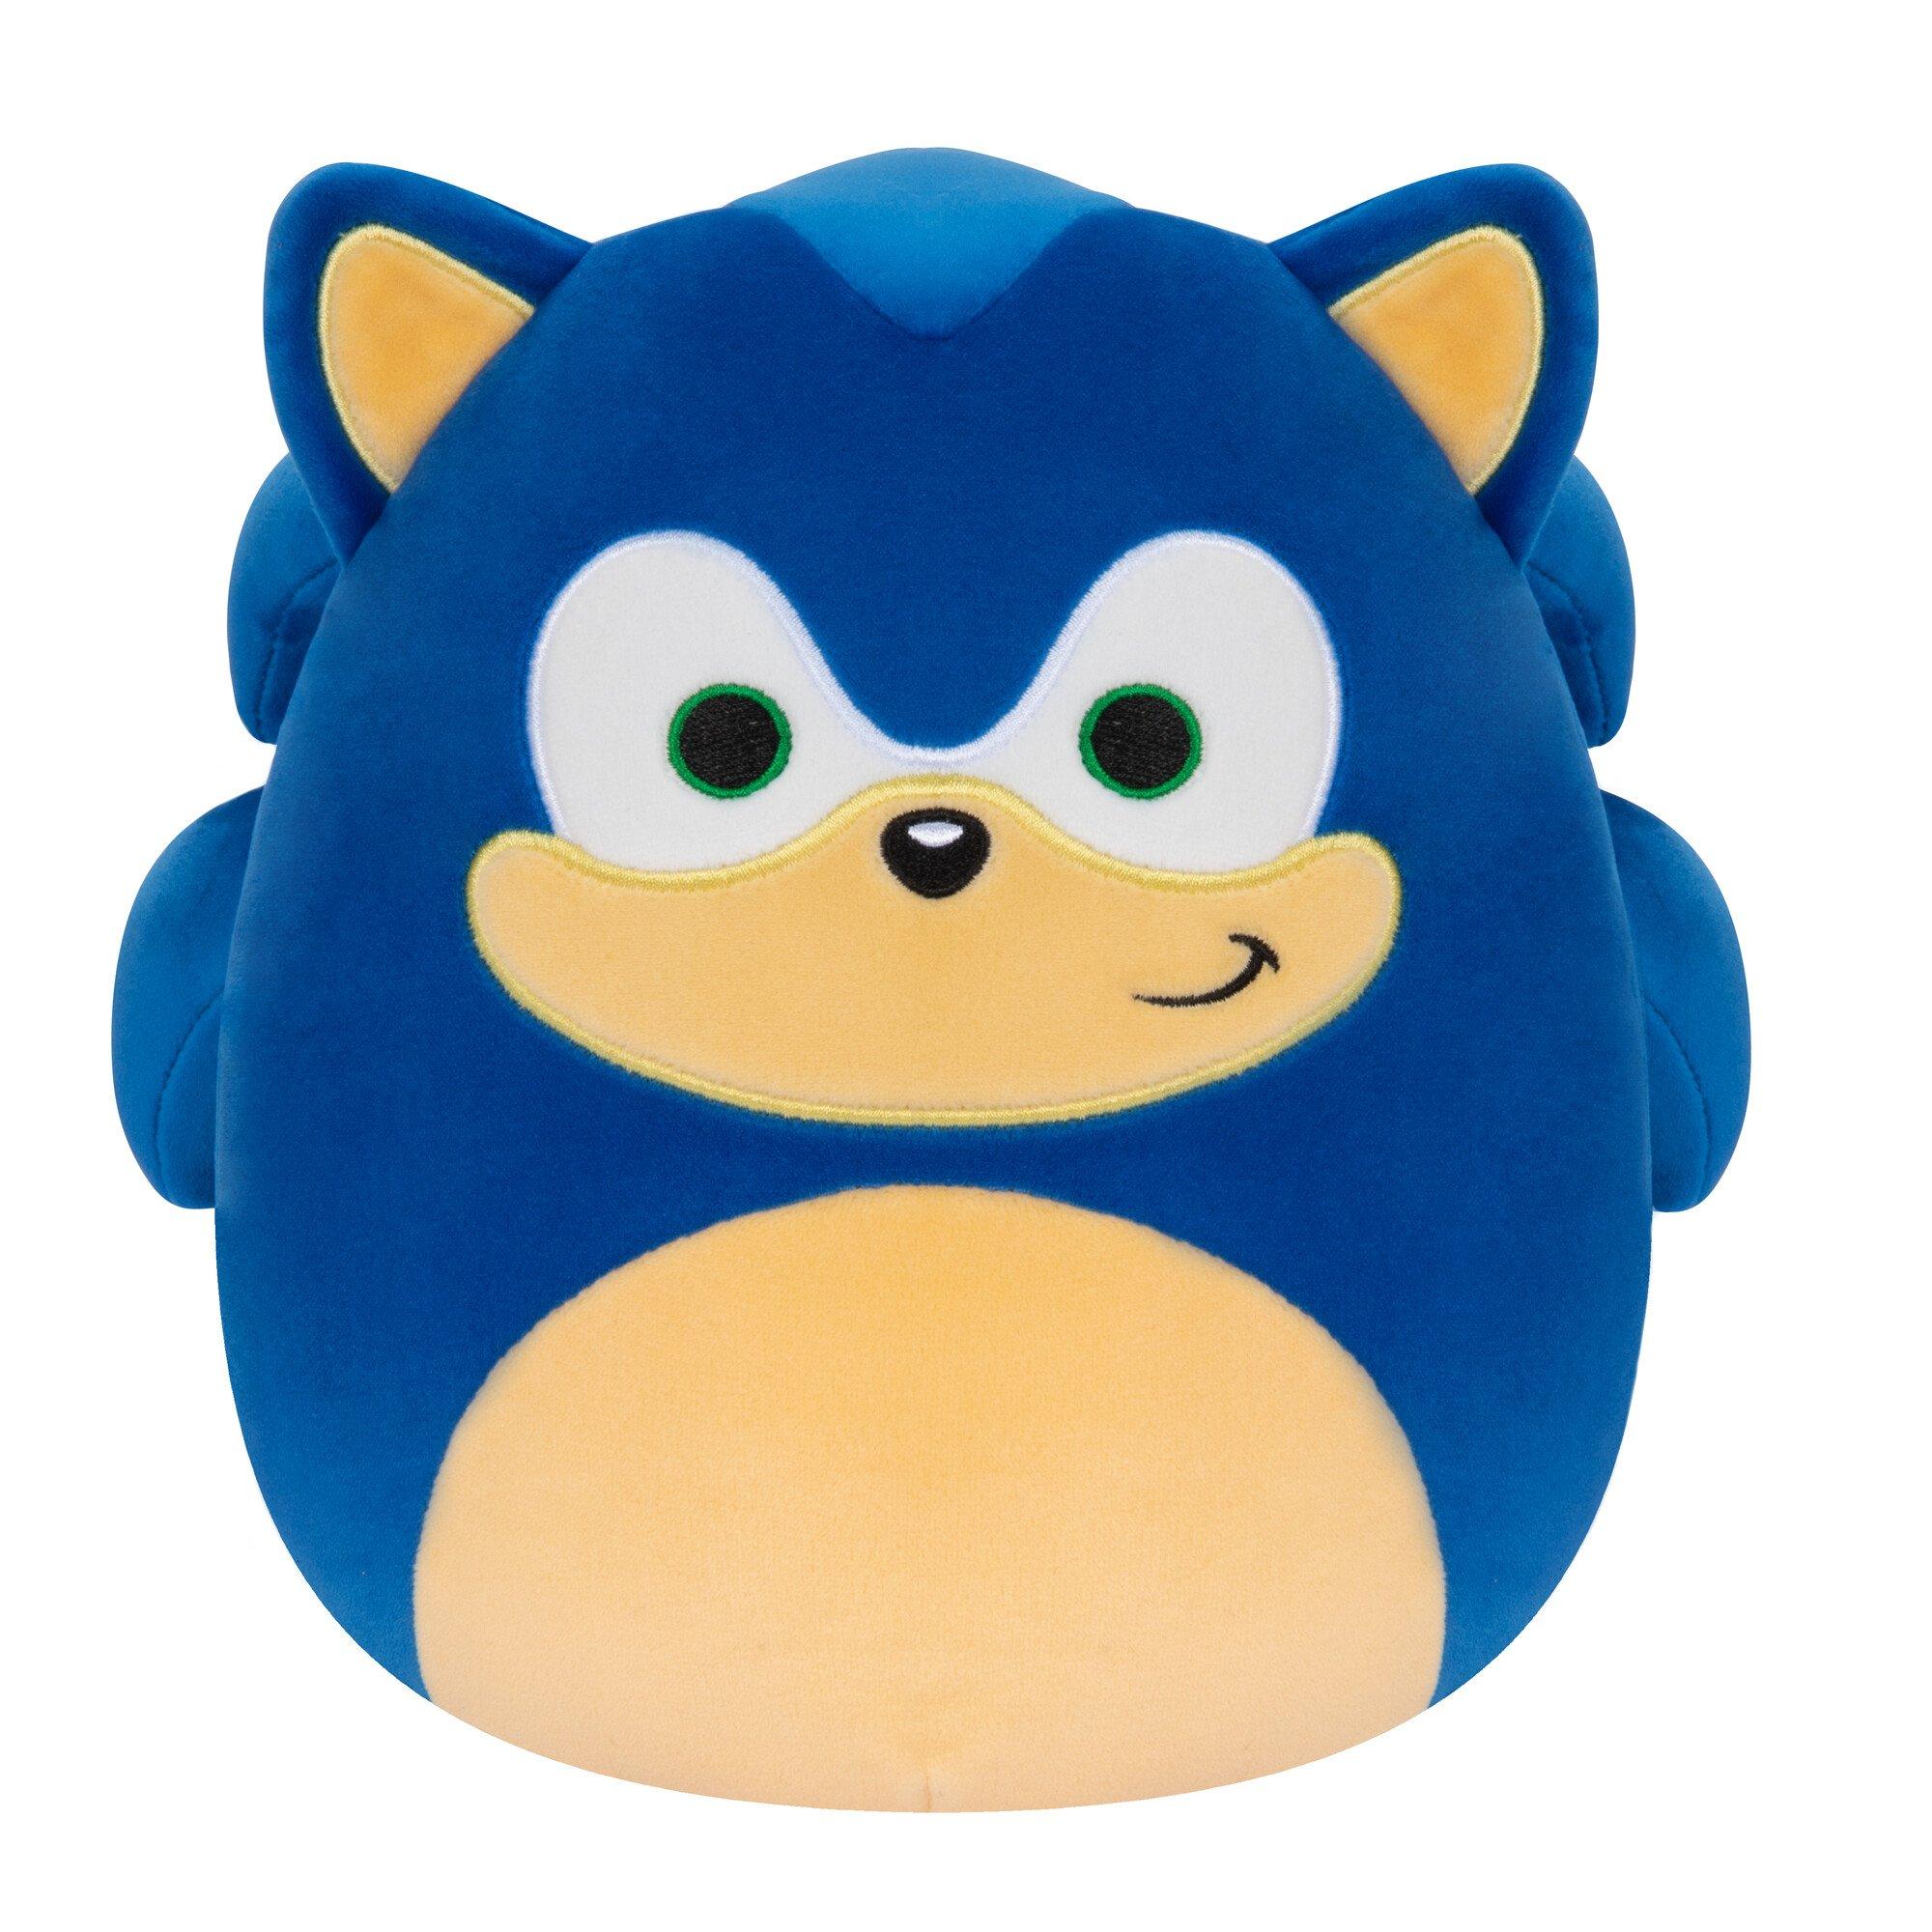 Squishmallows Sonic the Hedgehog 8-in Plush (Styles May Vary